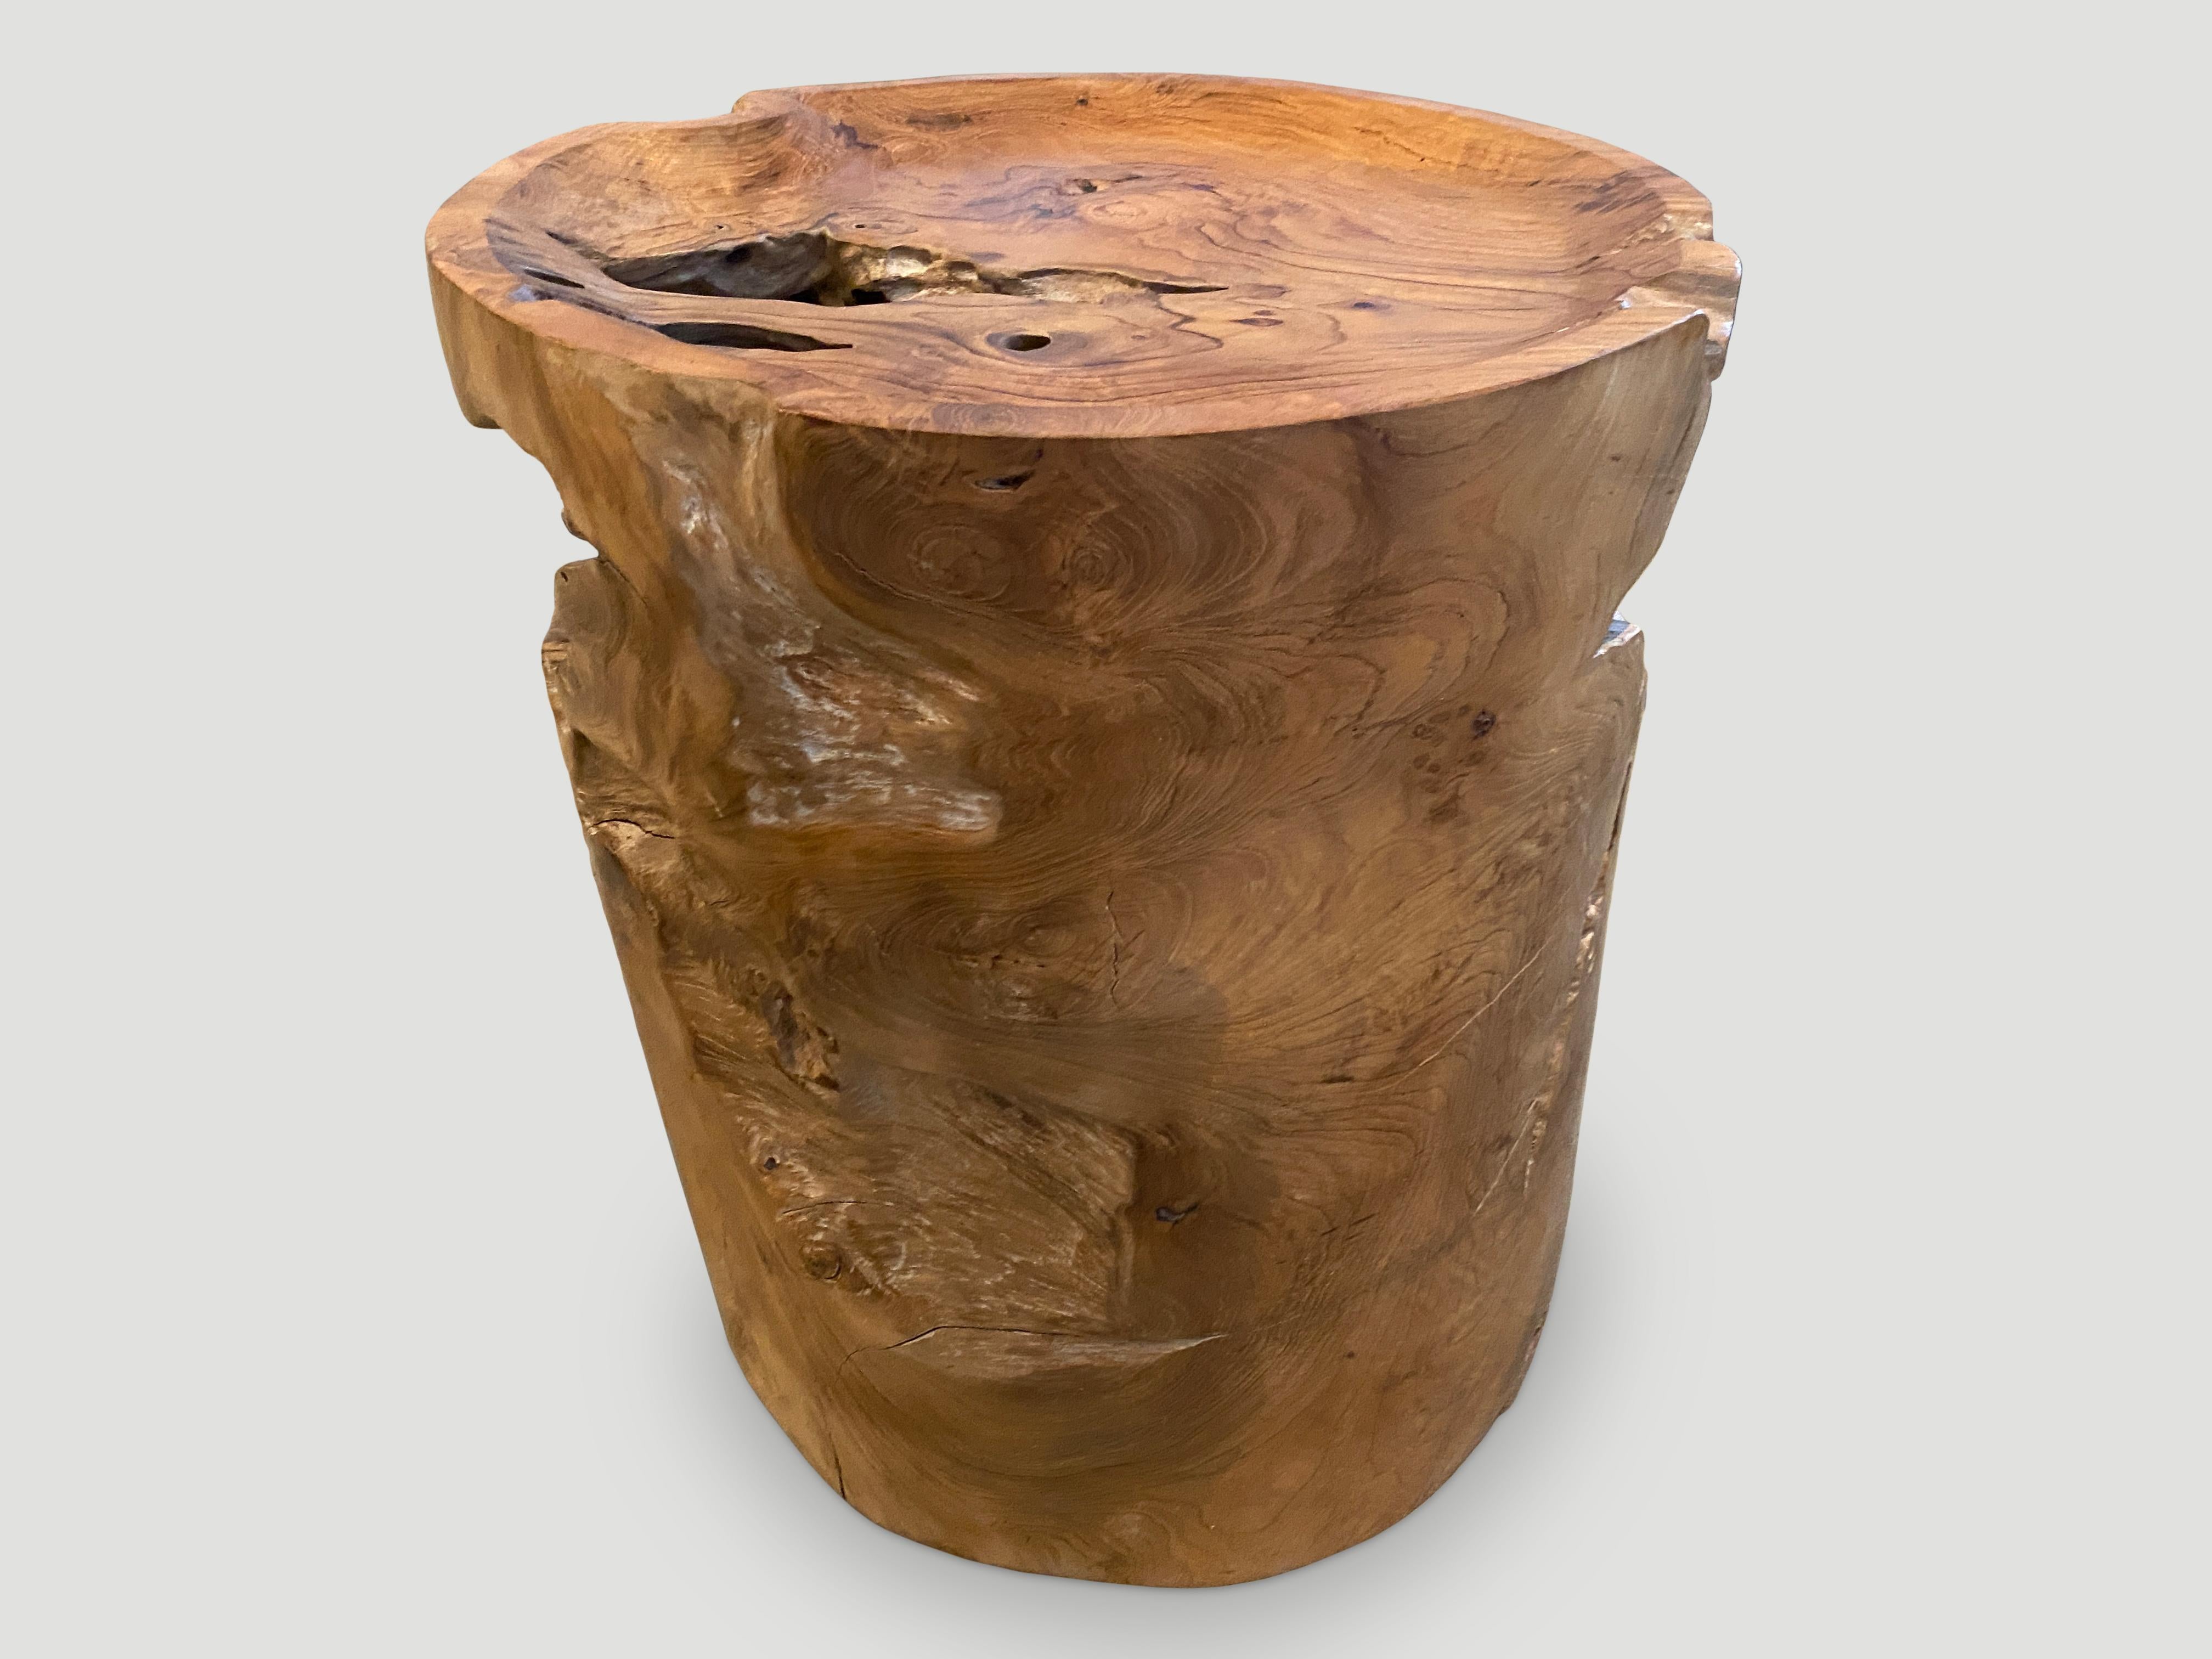 Natural organic formed reclaimed teak root side table. We hand carved the top section into a tray style and polished the beautiful aged teak with a natural oil finish. Organic is the new modern. 

Own an Andrianna Shamaris original.

Andrianna